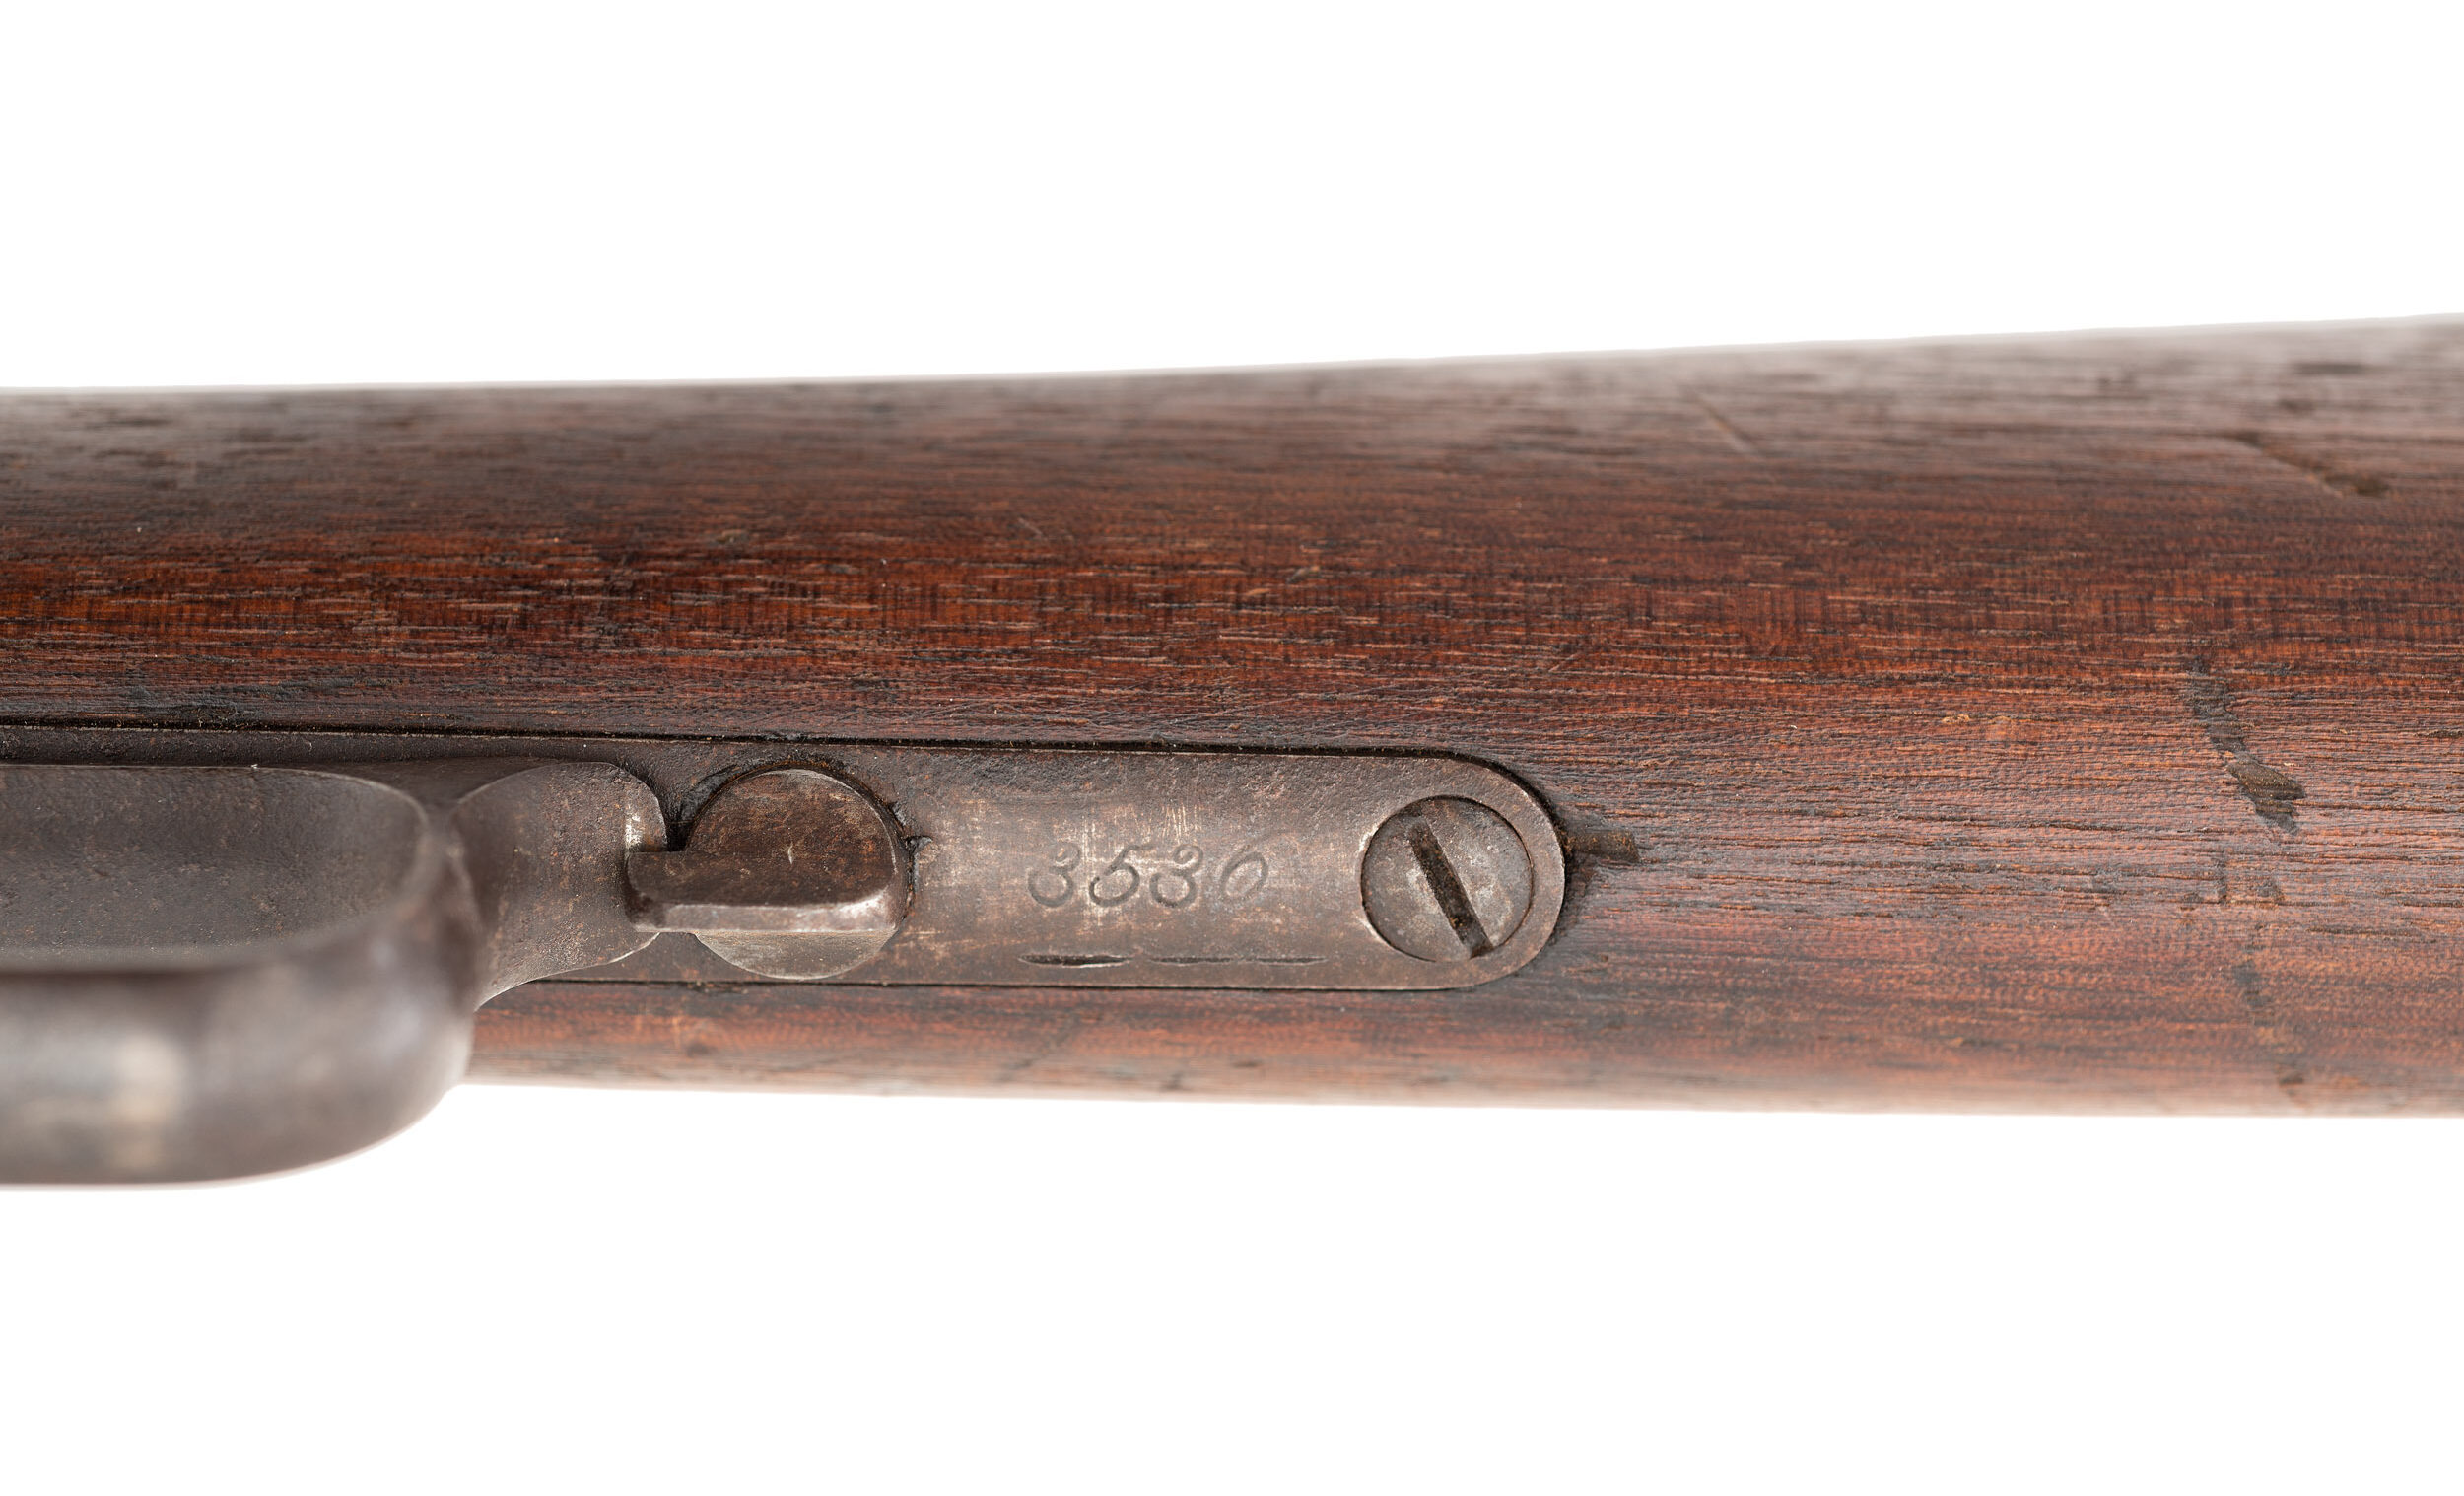 1873 Winchester Rifle and Carbine - Fort Smith National Historic